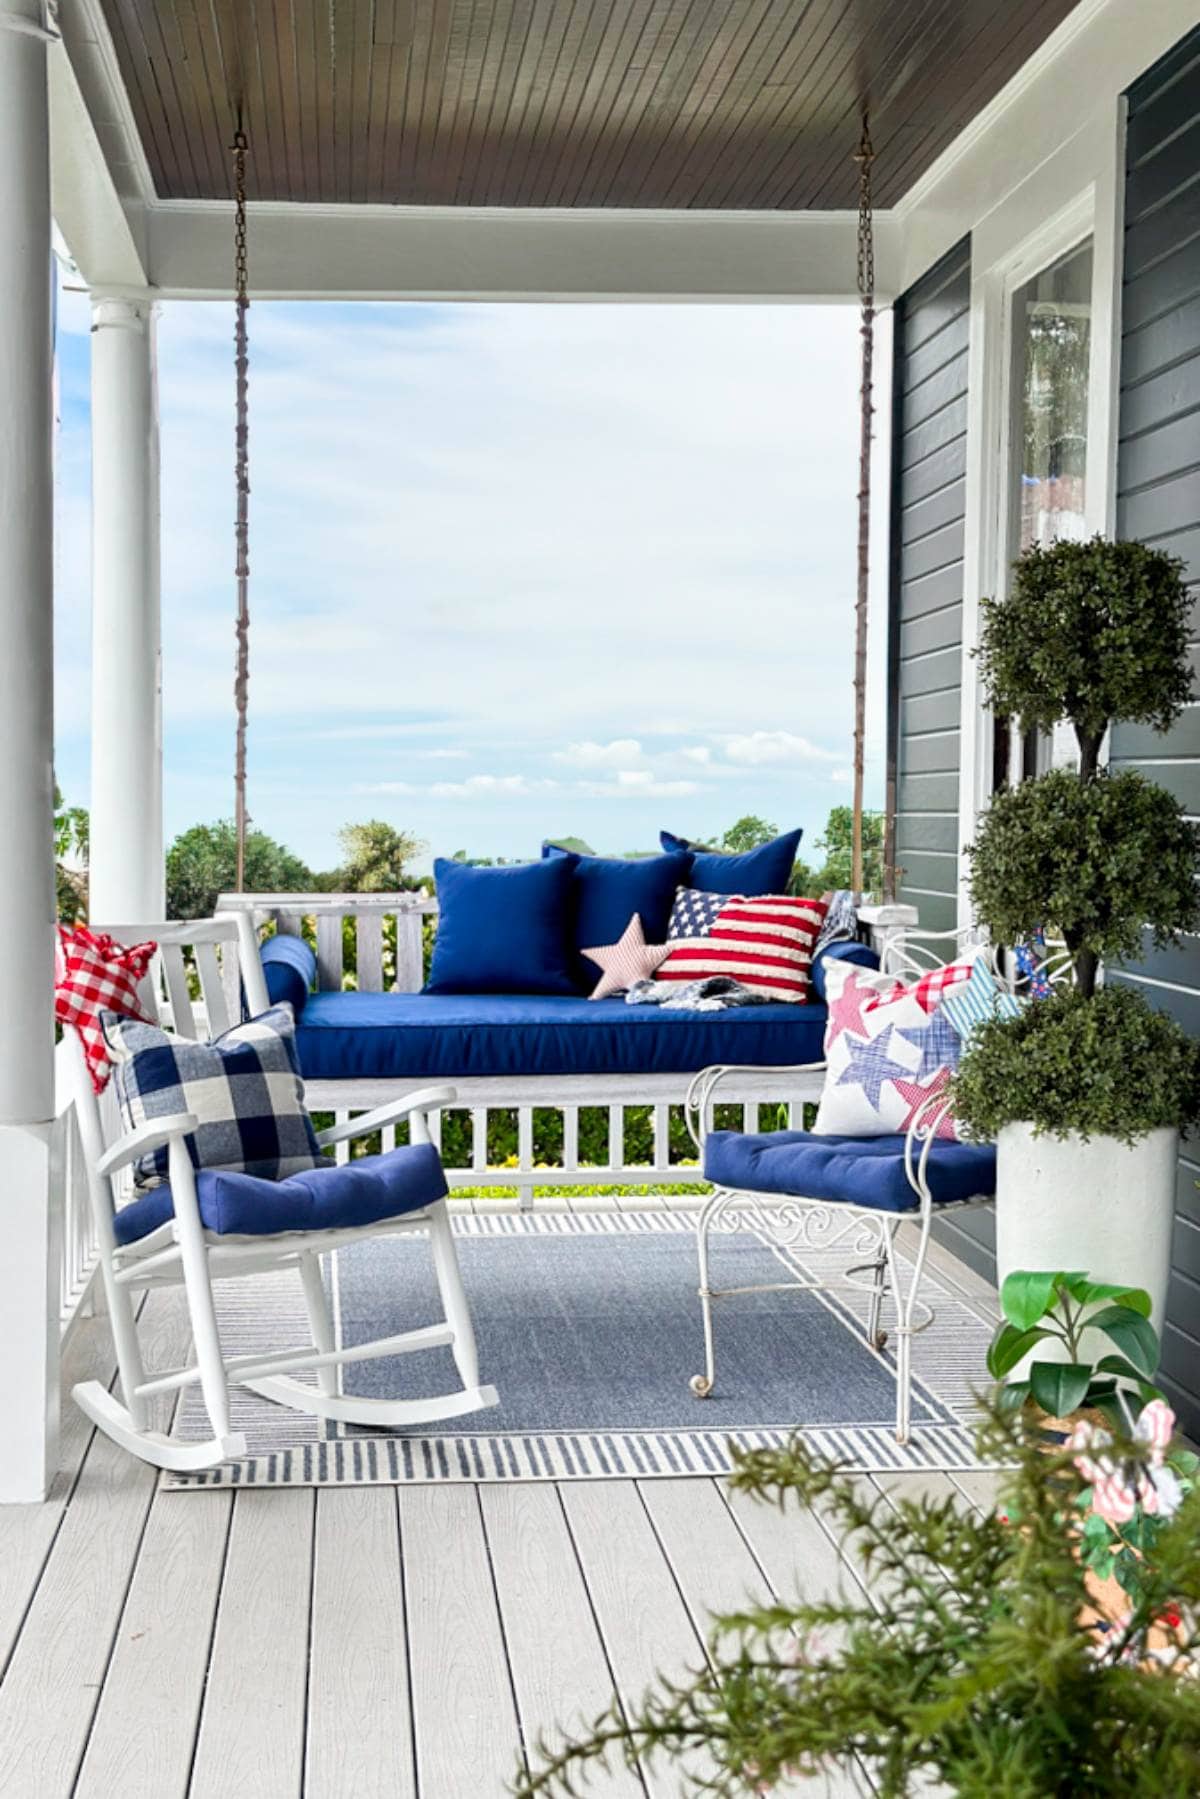 An All-american front porch decorated for the fourth of July with a porch swing. 